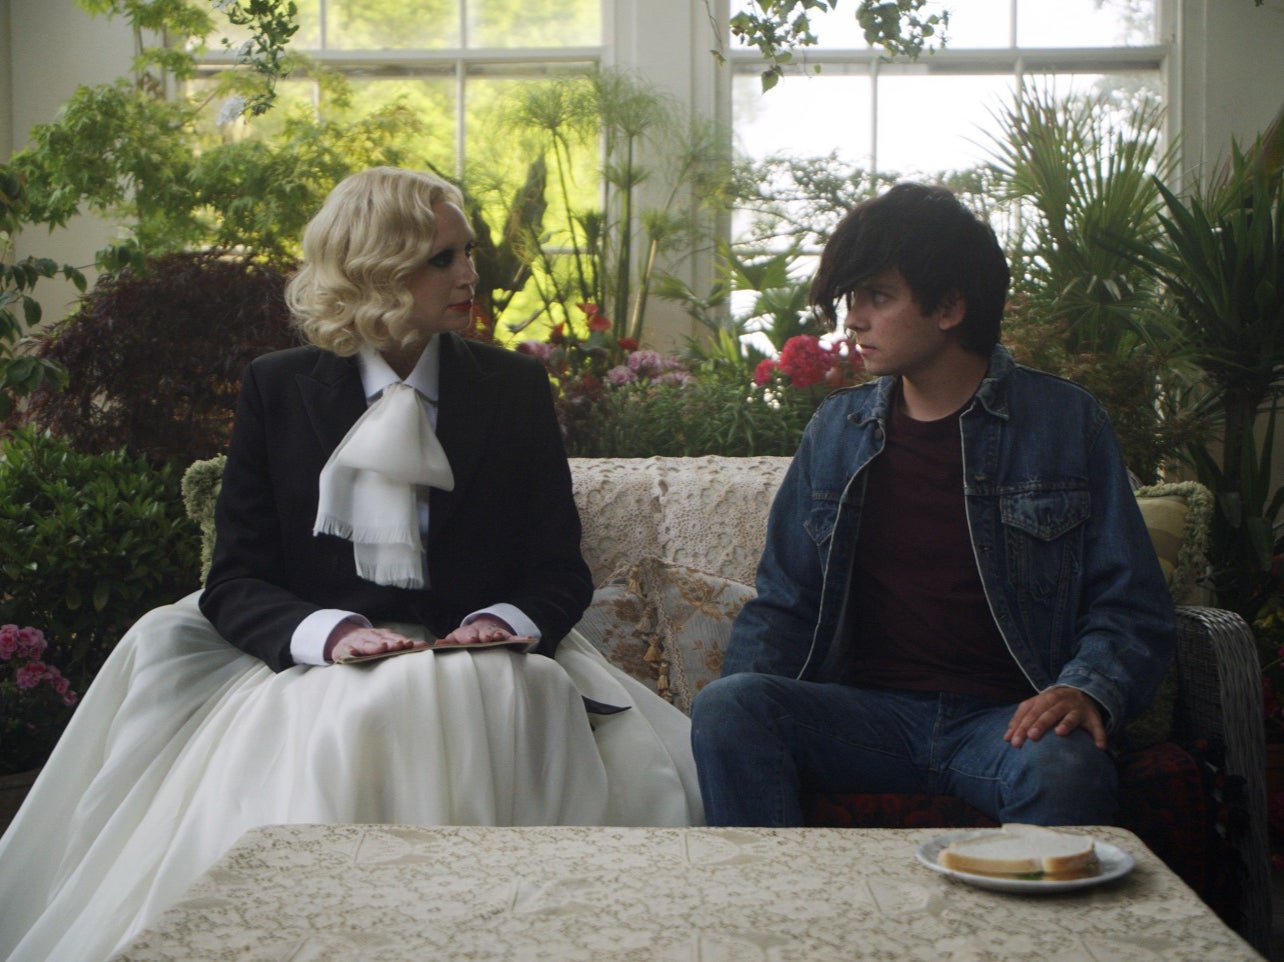 Surprising romance: Gwendoline Christie and Asa Butterfield in ‘Flux Gourmet’